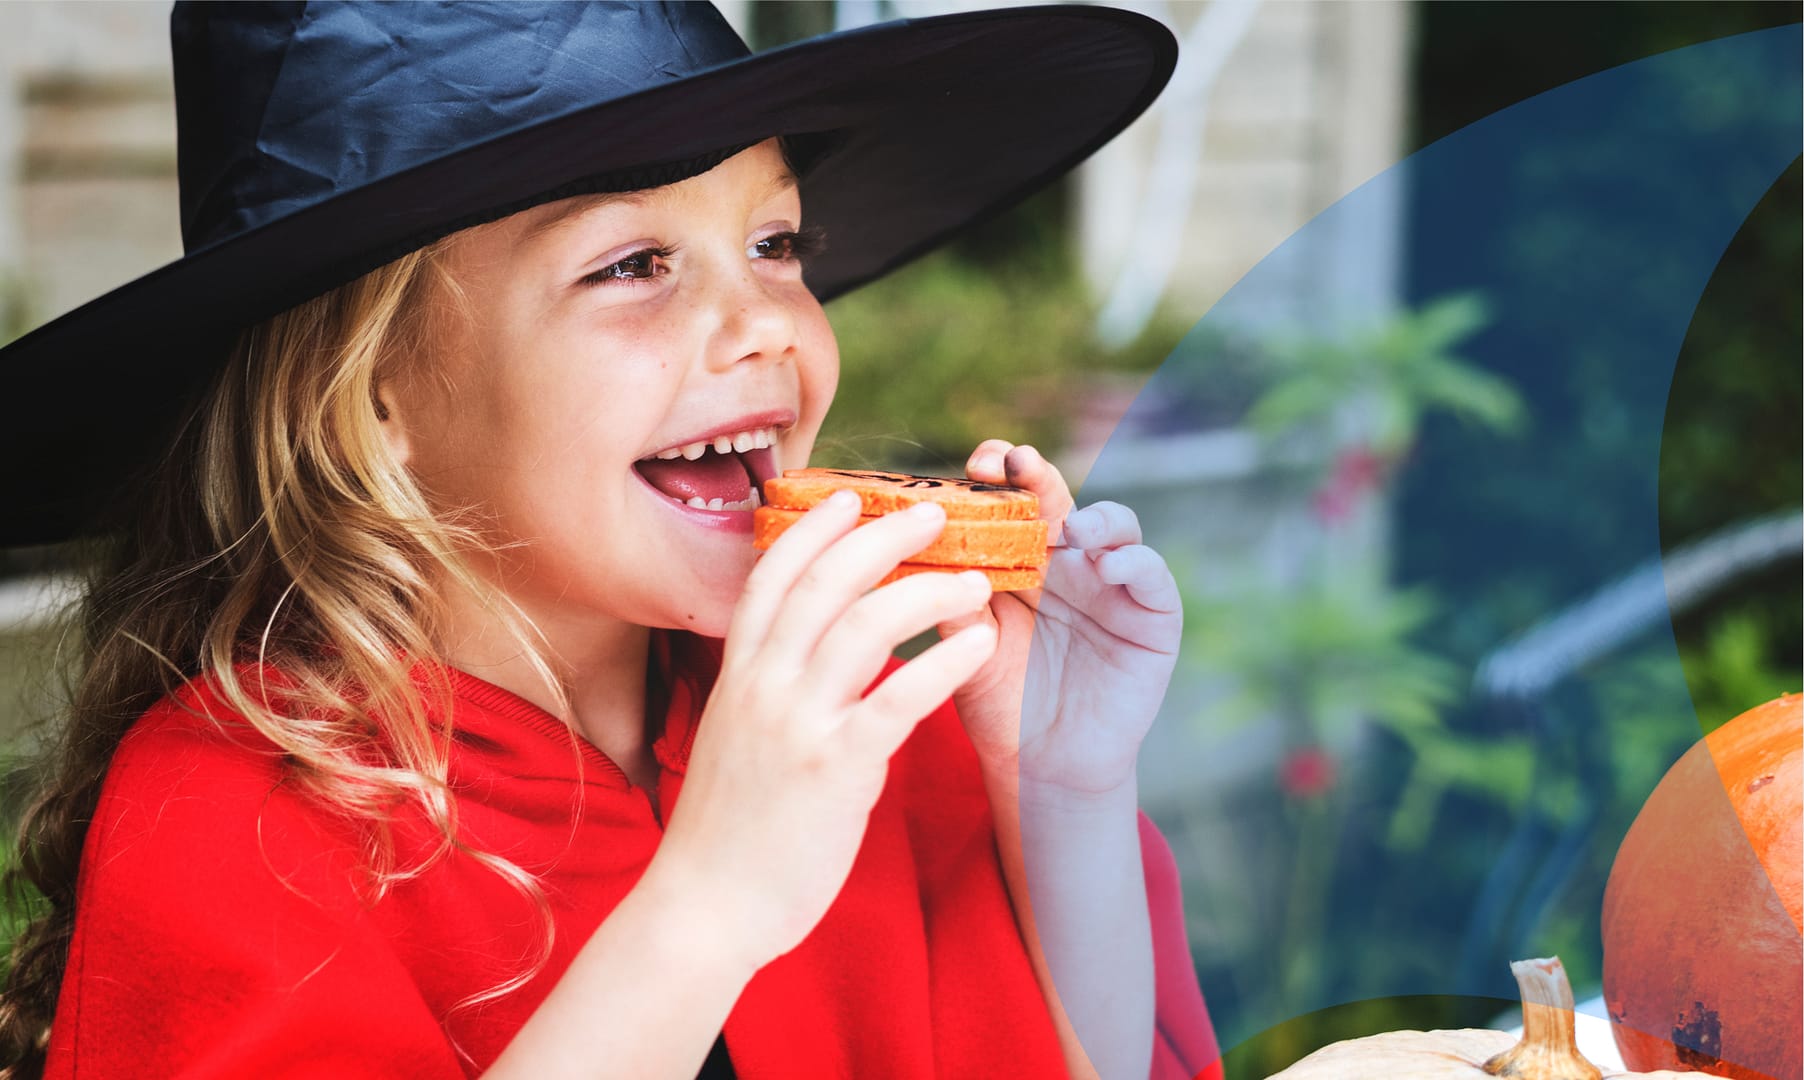 Halloween snacking that doesn't hurt oral health.